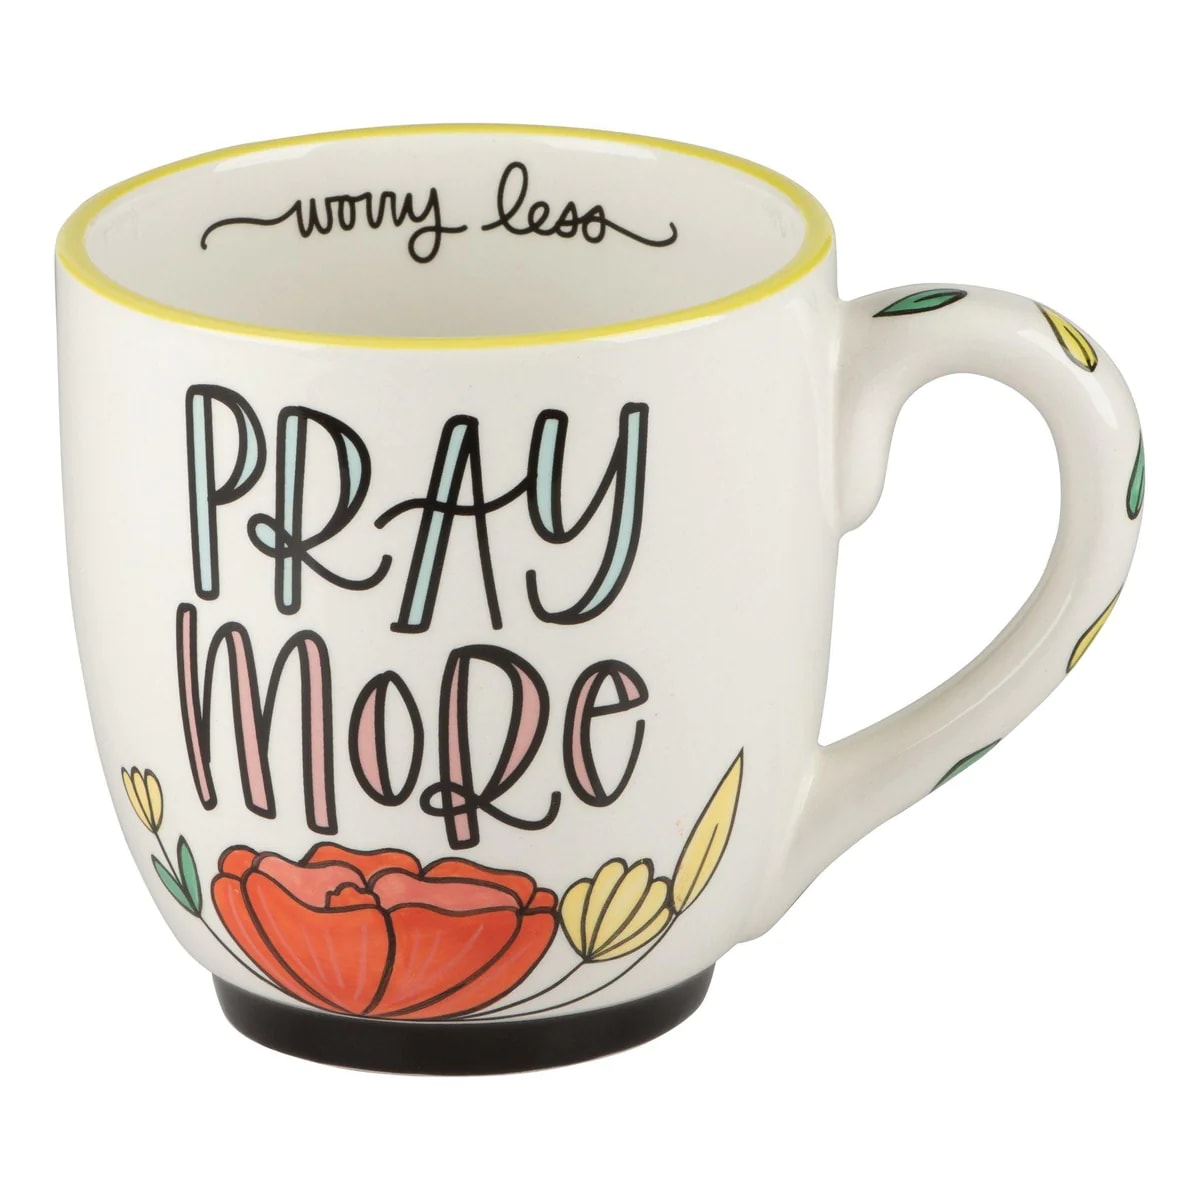 Pray More Worry Less Flower Mug - Looking for a coffee cup that will inspire you every morning? Look no further than our Pray More Worry Less Flower Mug. In a world plagued with worry, remind yourself of the power of prayer each morning as you sip your coffee or tea.